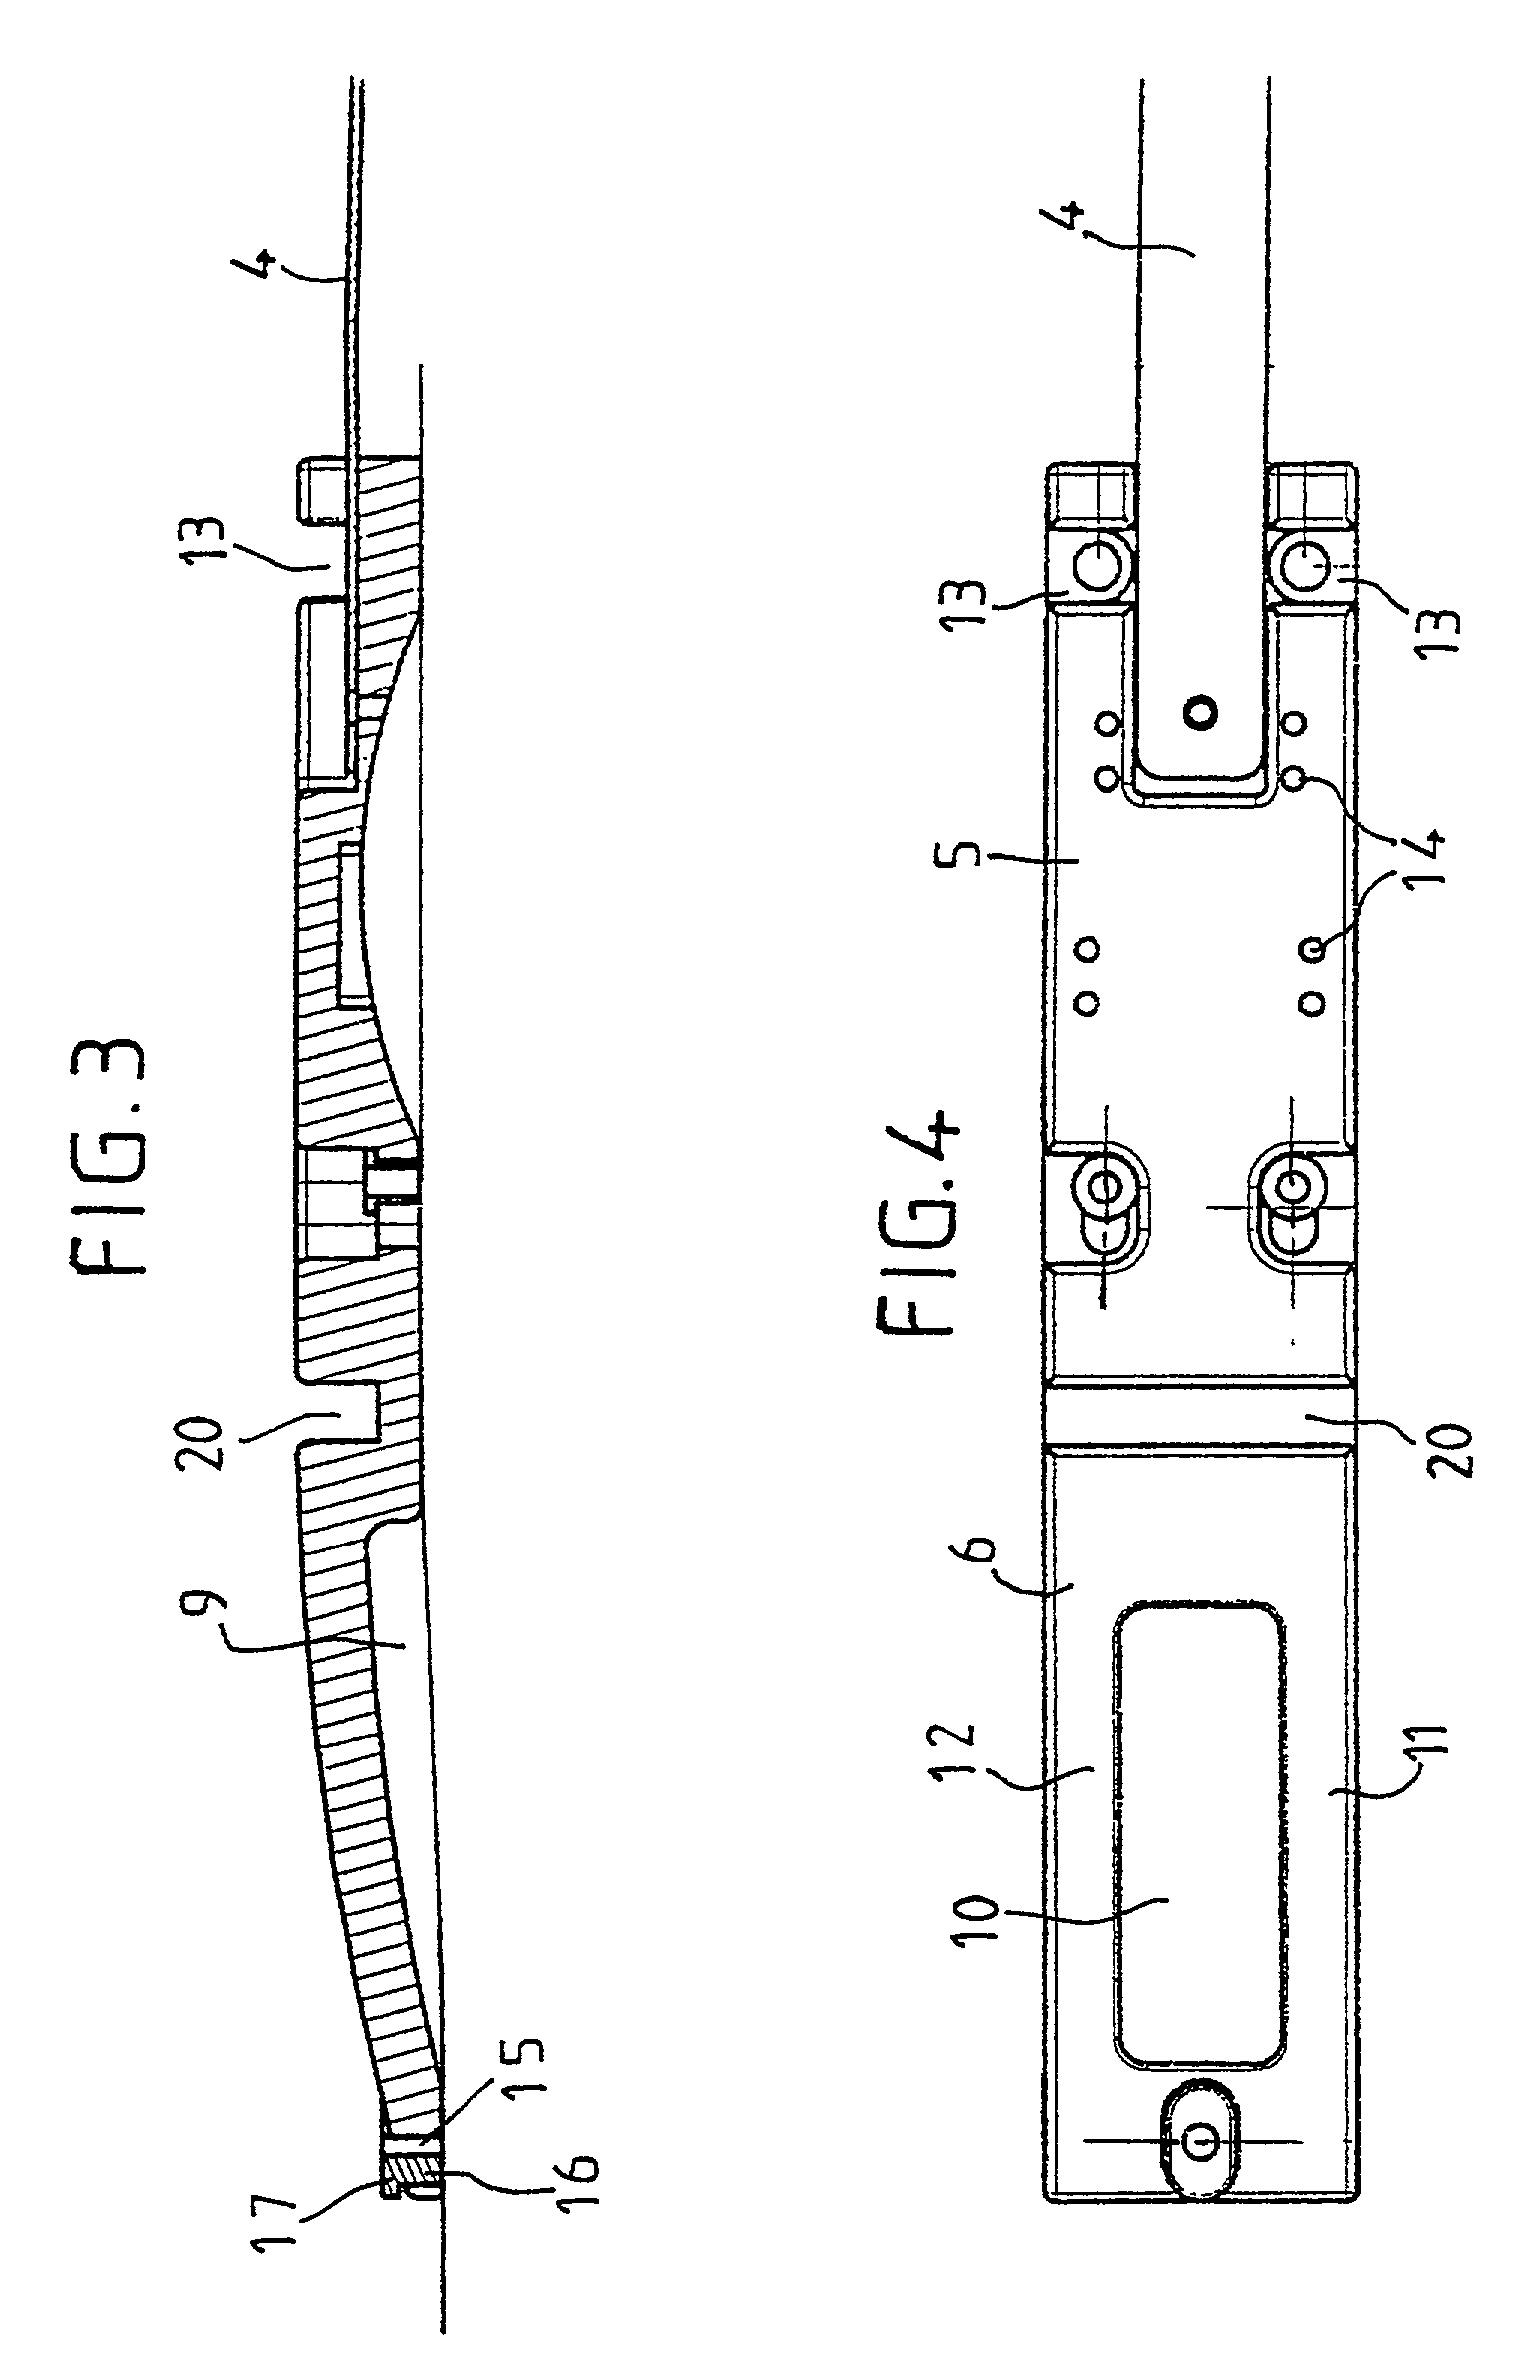 Device for raising at least one binding element used on a board for gliding